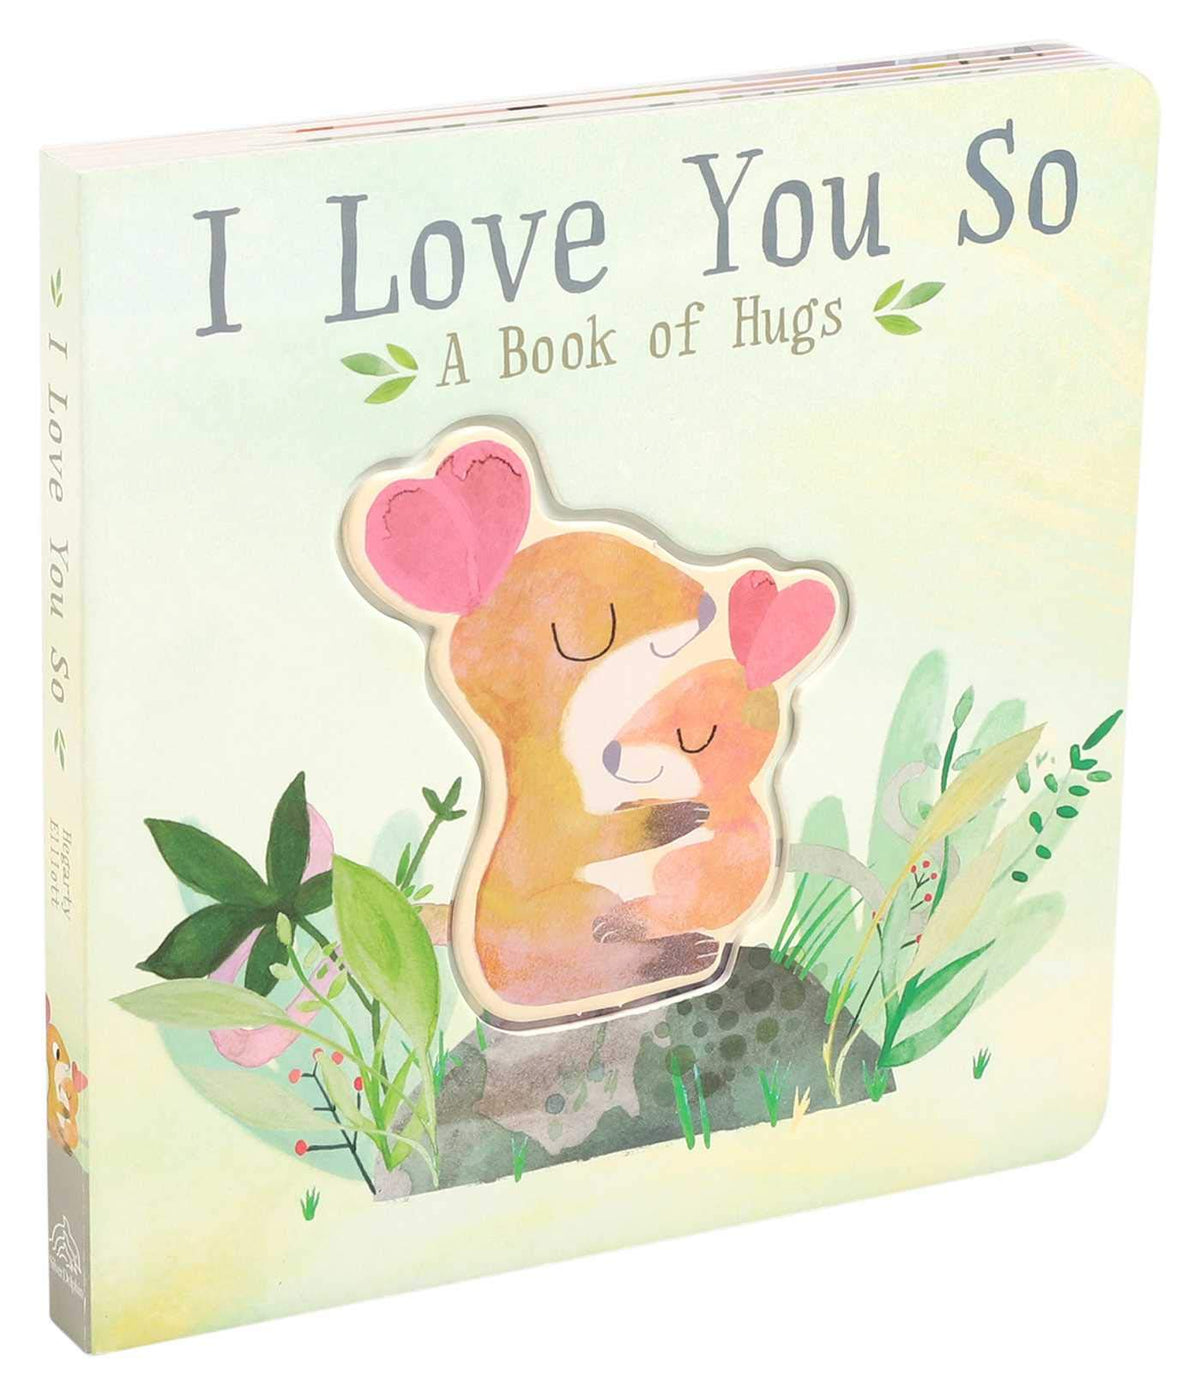 I Love You So by Patricia Hegerty